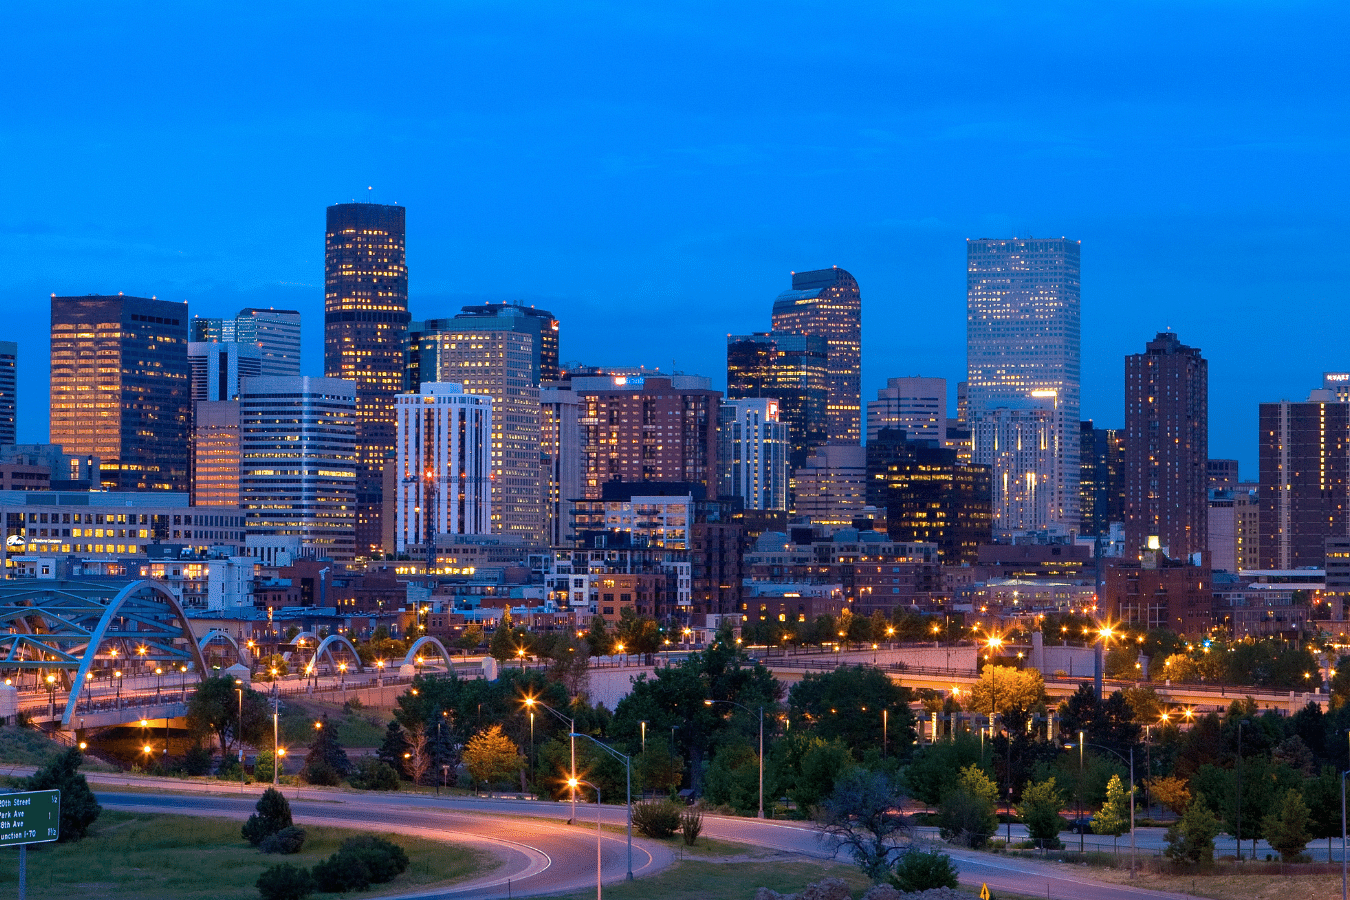 A night time view of the city skyline in Denver Colorado